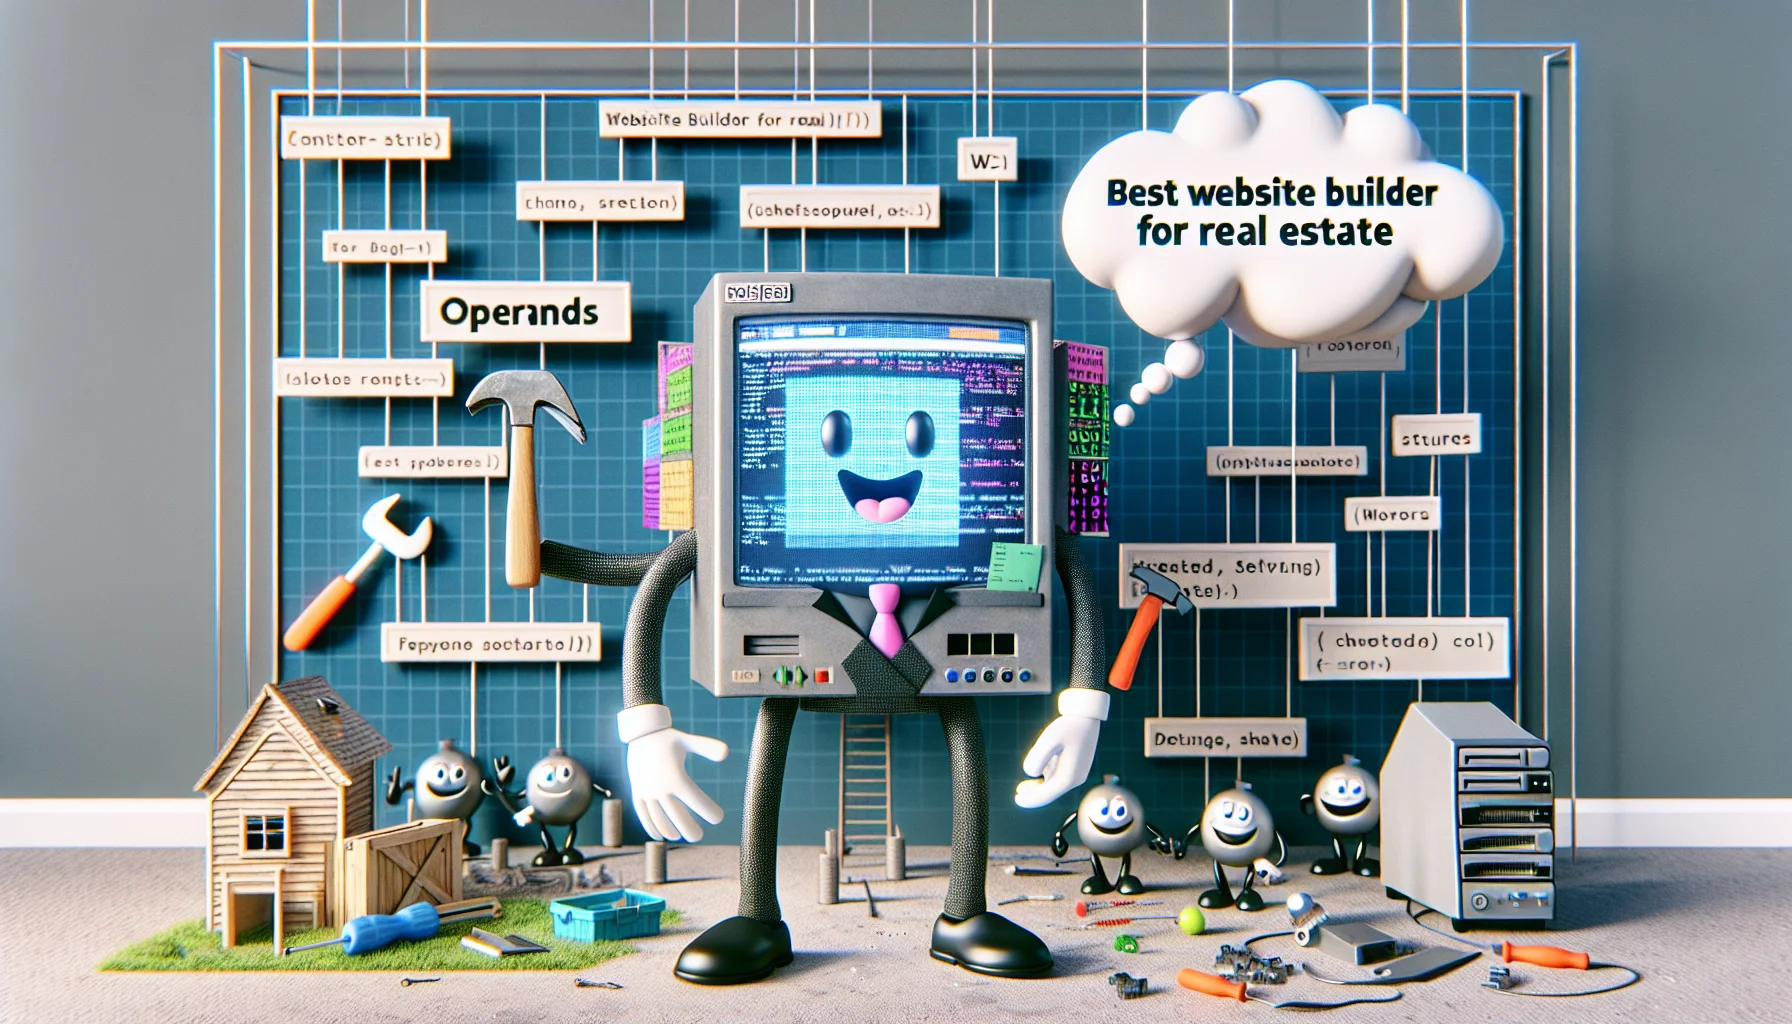 Imagine a humorous setting featuring an anthropomorphic computer character, well-dressed and with a confident smile on its screen-face. In its digital hands, it's holding a variety of building tools, such as a virtual hammer, screwdriver, and wrench somehow crafted from pixels and binary code. This character stands in front of a half-built website that looks like a blueprint of a house, denoting the concept of a real estate website. There are operands, functions, and strings hanging like labels from different parts of the building, indicating the website's construction areas. Underneath this scene, a talking cloud reads 'Best Website Builder for Real Estate' in bold, and there are silly looking server characters queued up nearby, playfully symbolizing web hosting services.